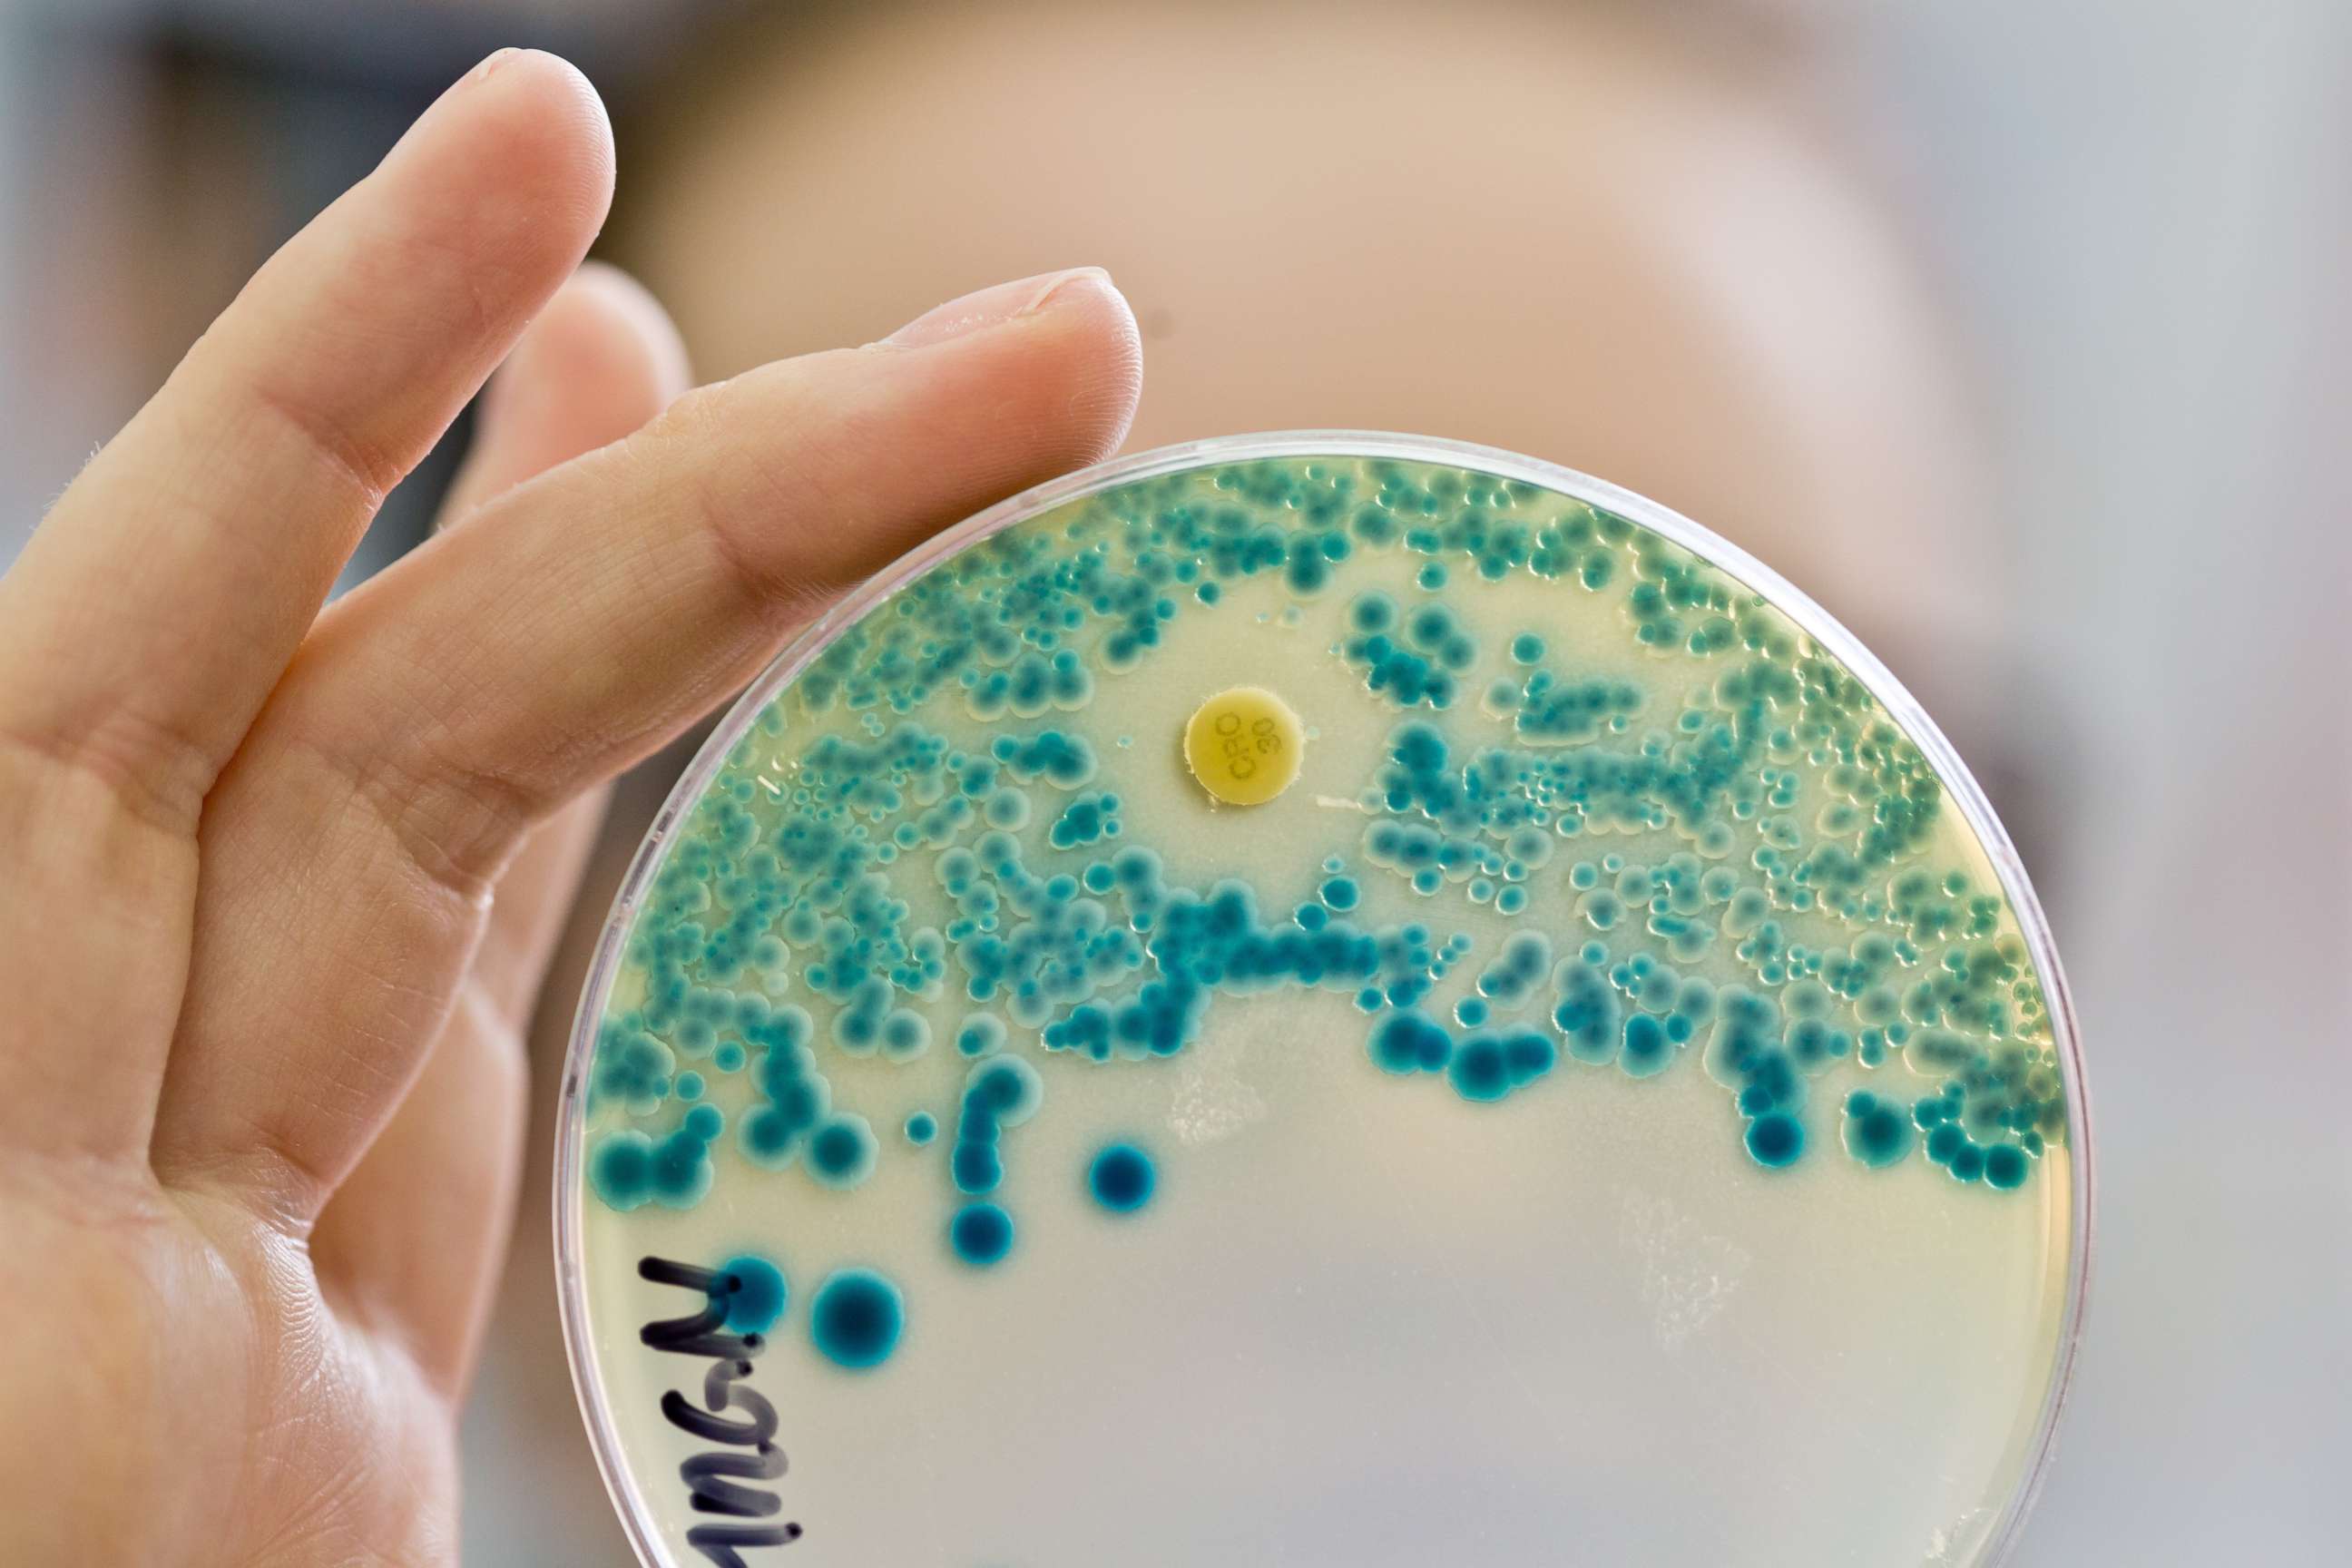 PHOTO: A lab assistant holds up a bacterial culture used to determine drug resistance at a lab in Erlangen, Germany, July 21, 2015.